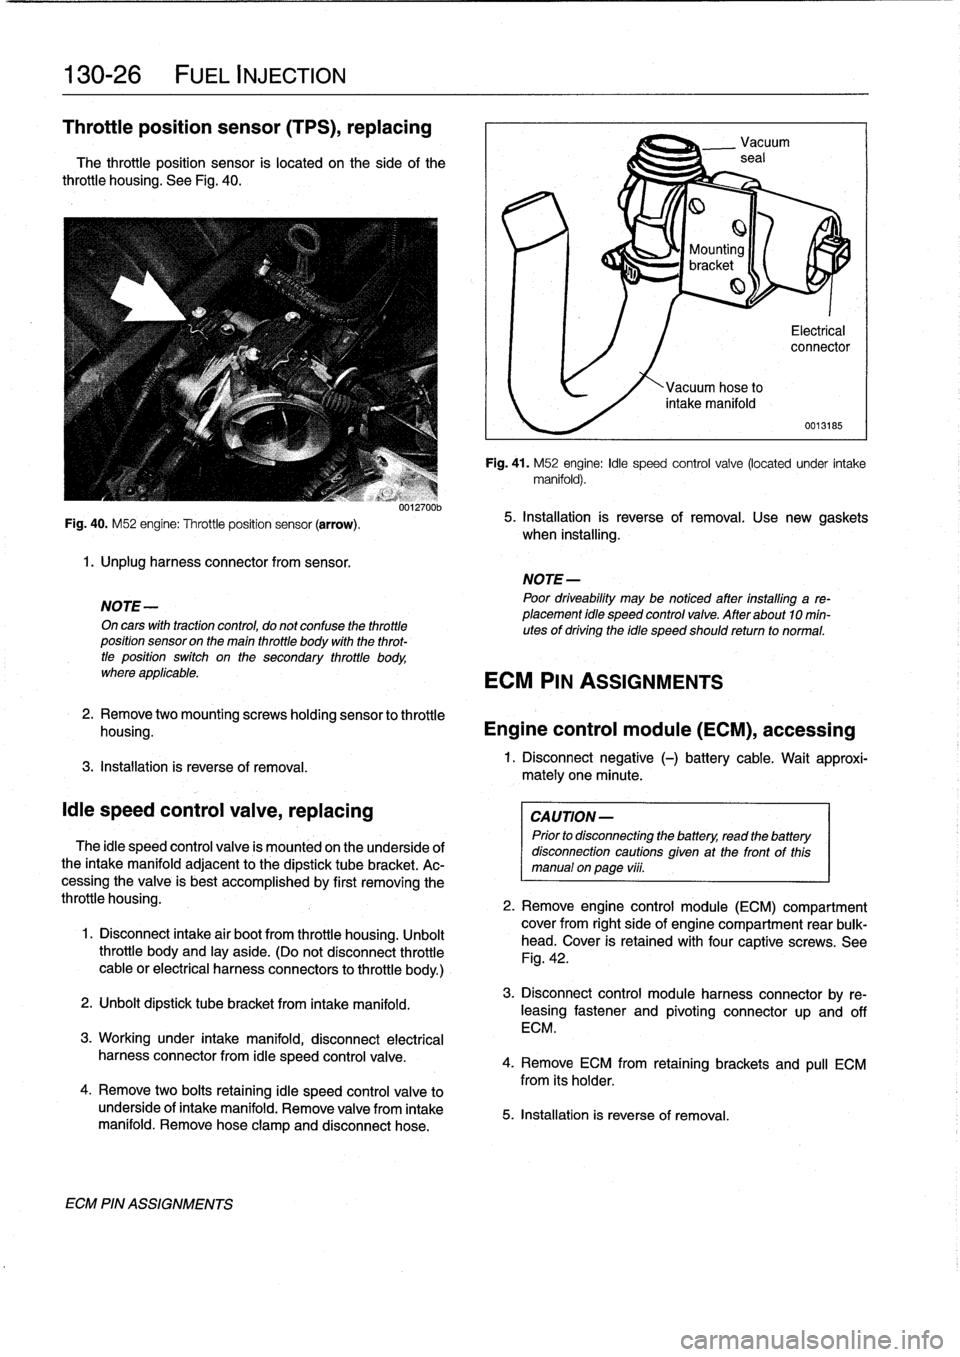 BMW M3 1996 E36 Workshop Manual 
130-26

	

FUEL
INJECTION

Throttle
position
sensor
(TPS),
replacing

The
throttie
position
sensor
is
located
on
the
side
of
the
throttie
housing
.
See
Fig
.
40
.

Fig
.
40
.
M52
engine
:
Throttle
po